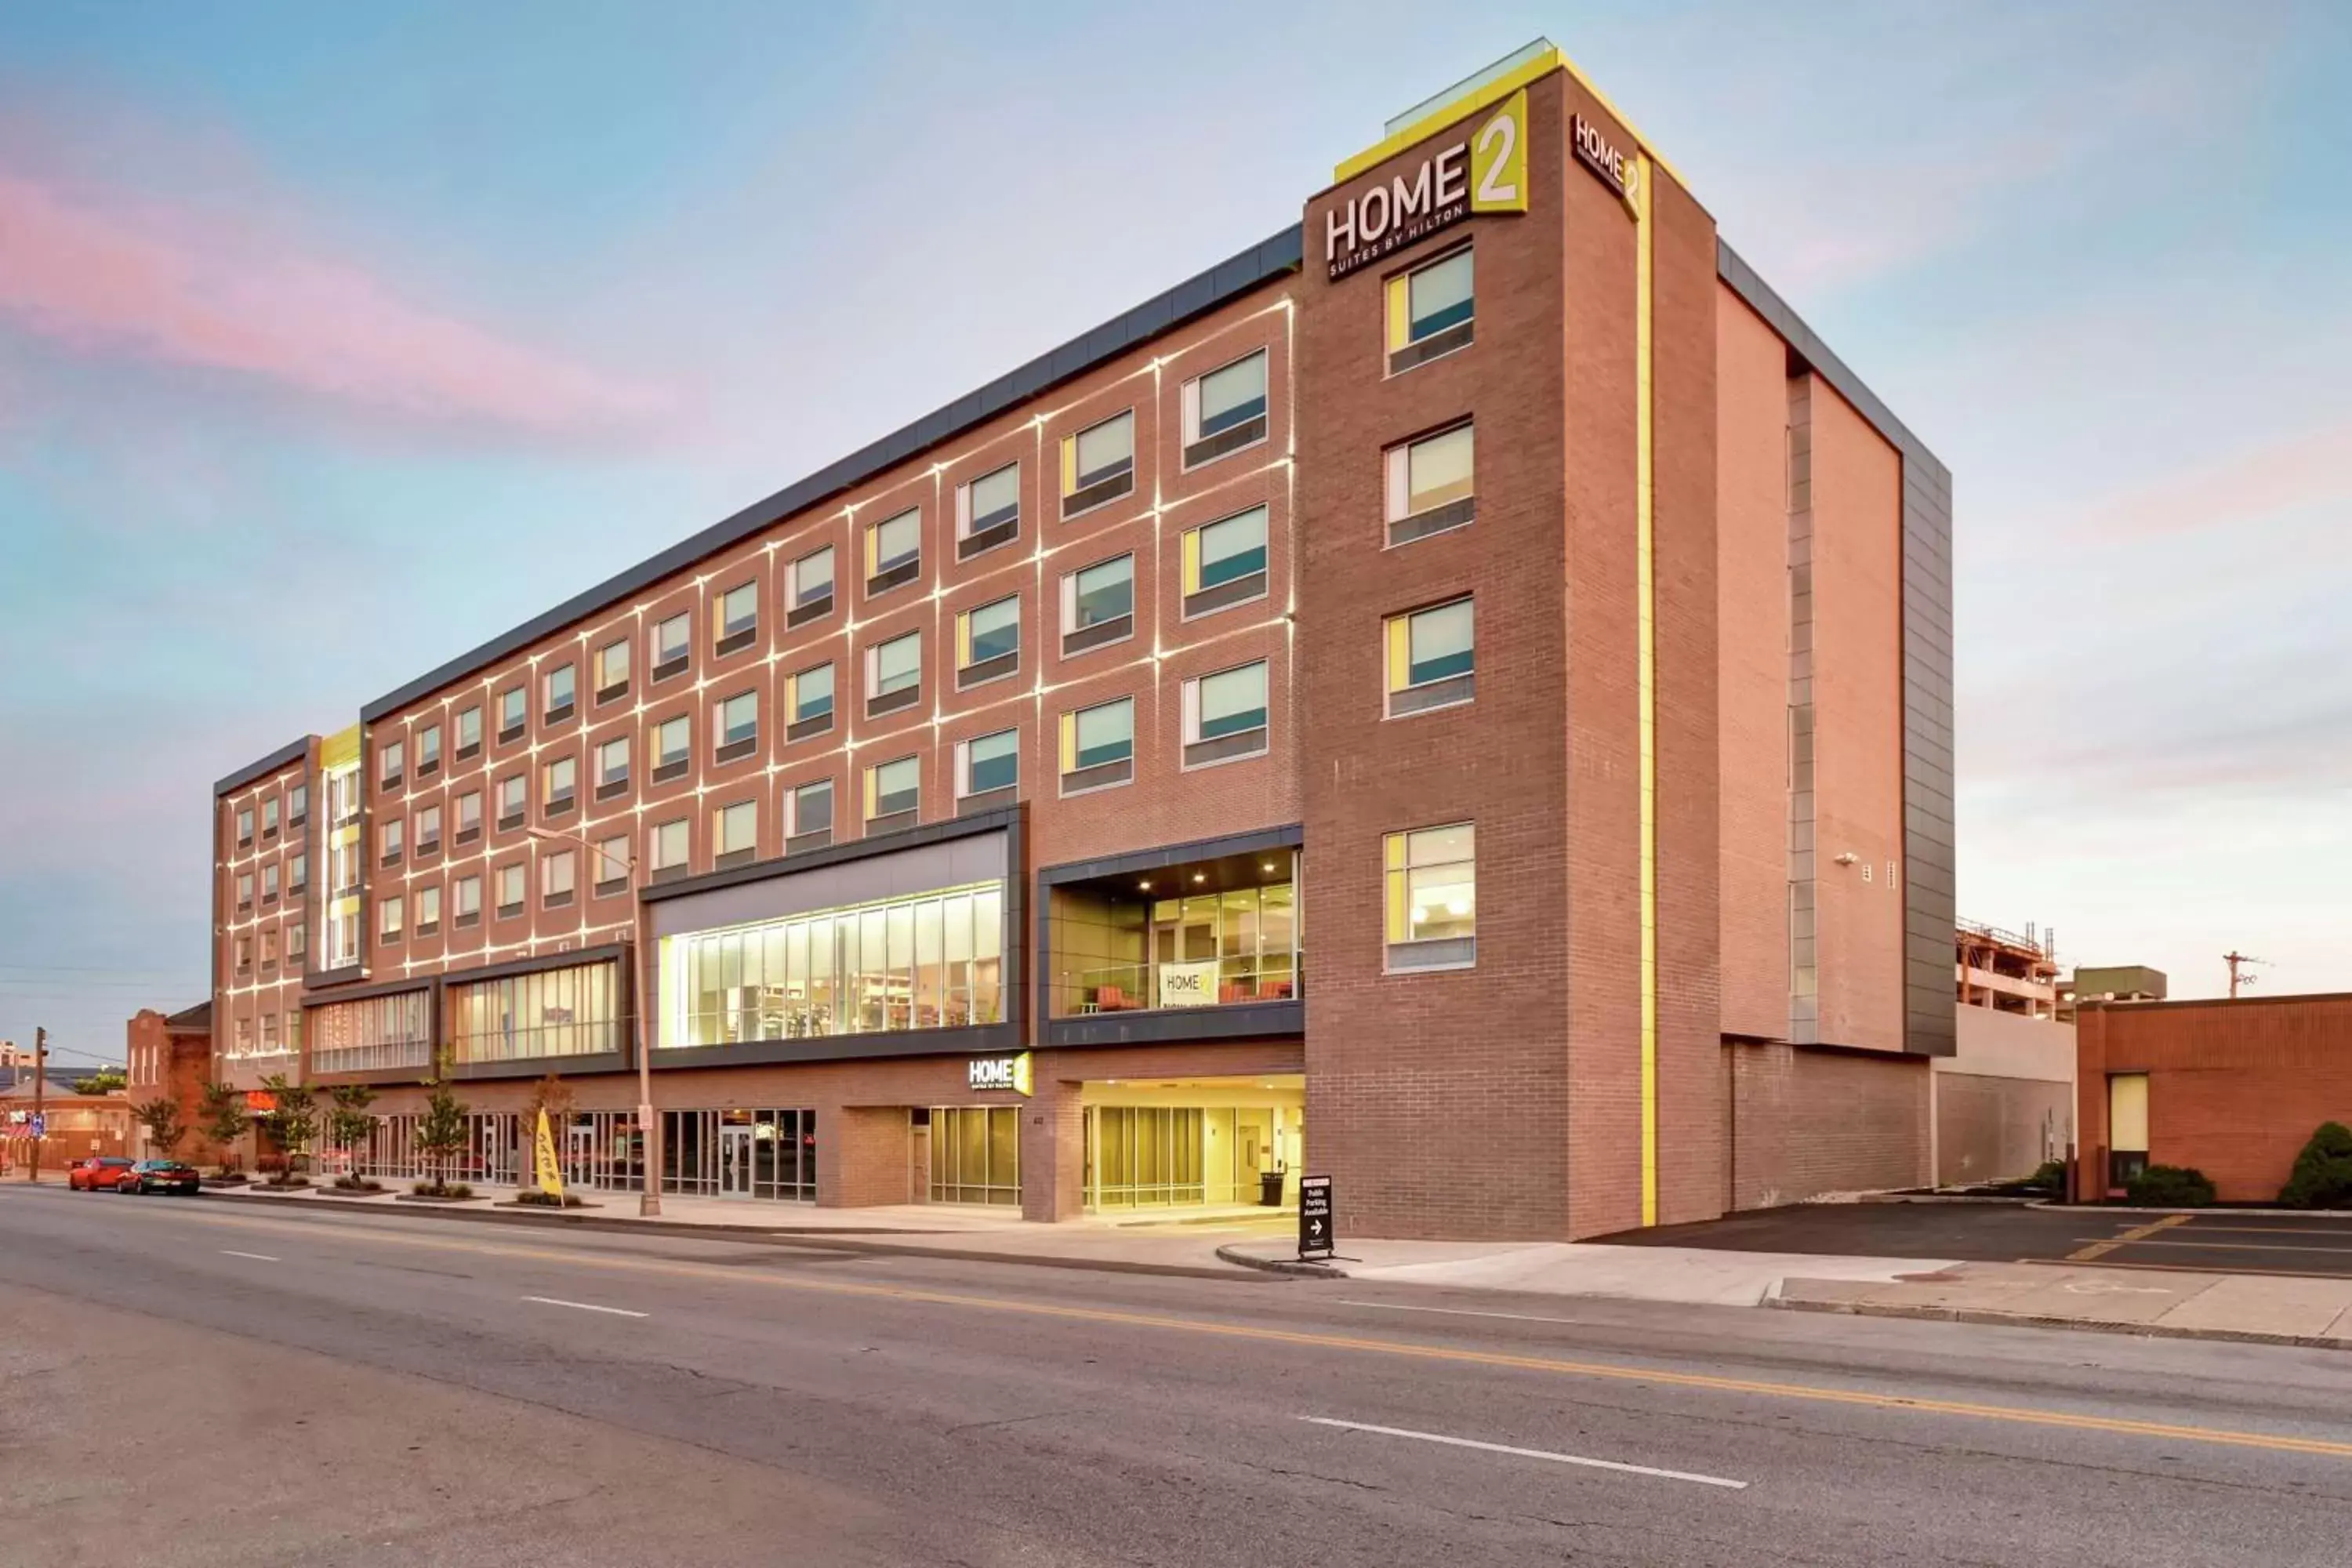 Property Building in Home2 Suites By Hilton Columbus Downtown